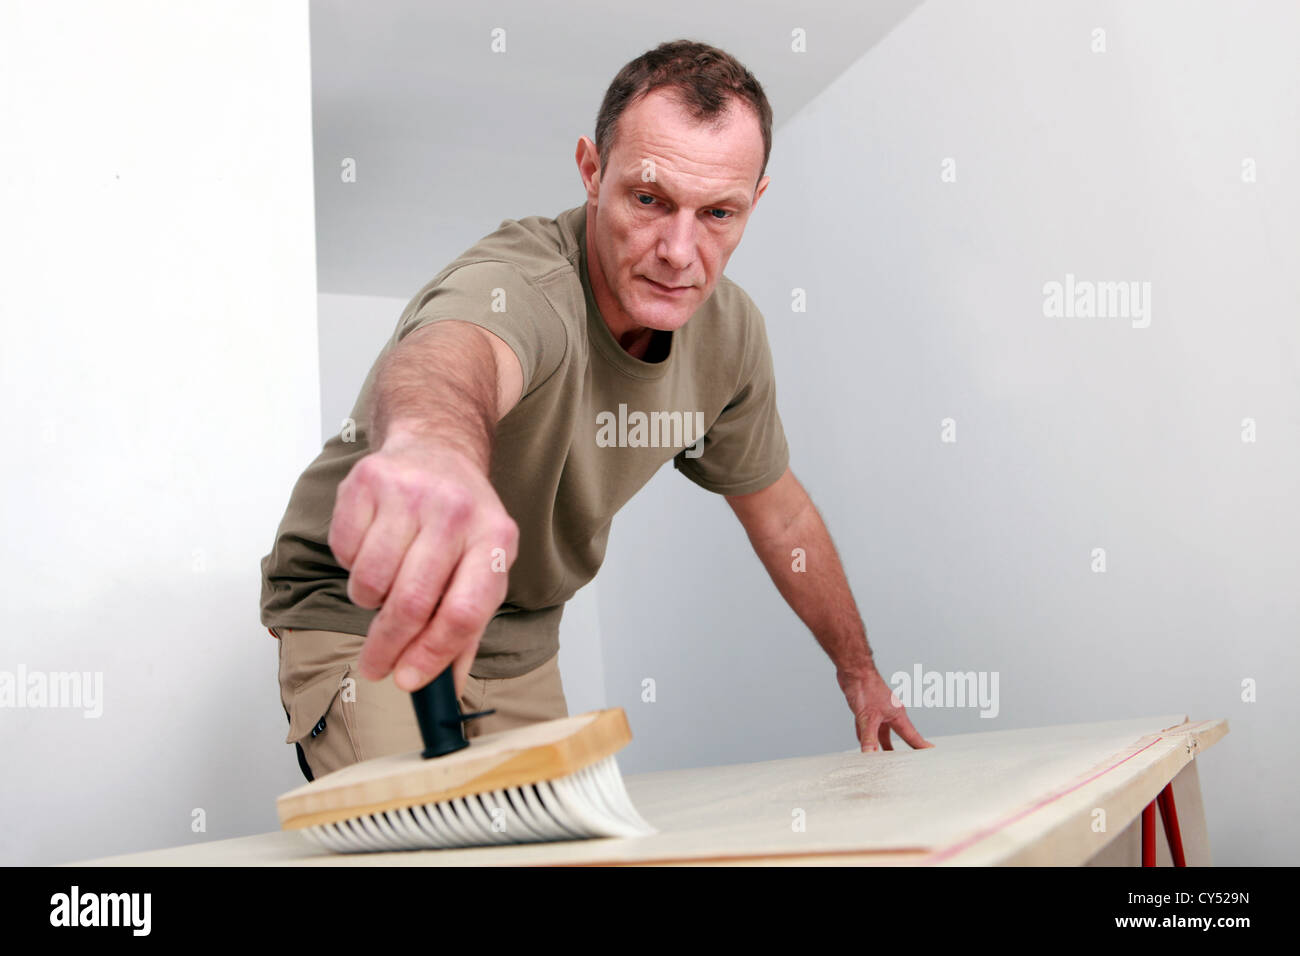 Man sweeping a wooden surface Stock Photo